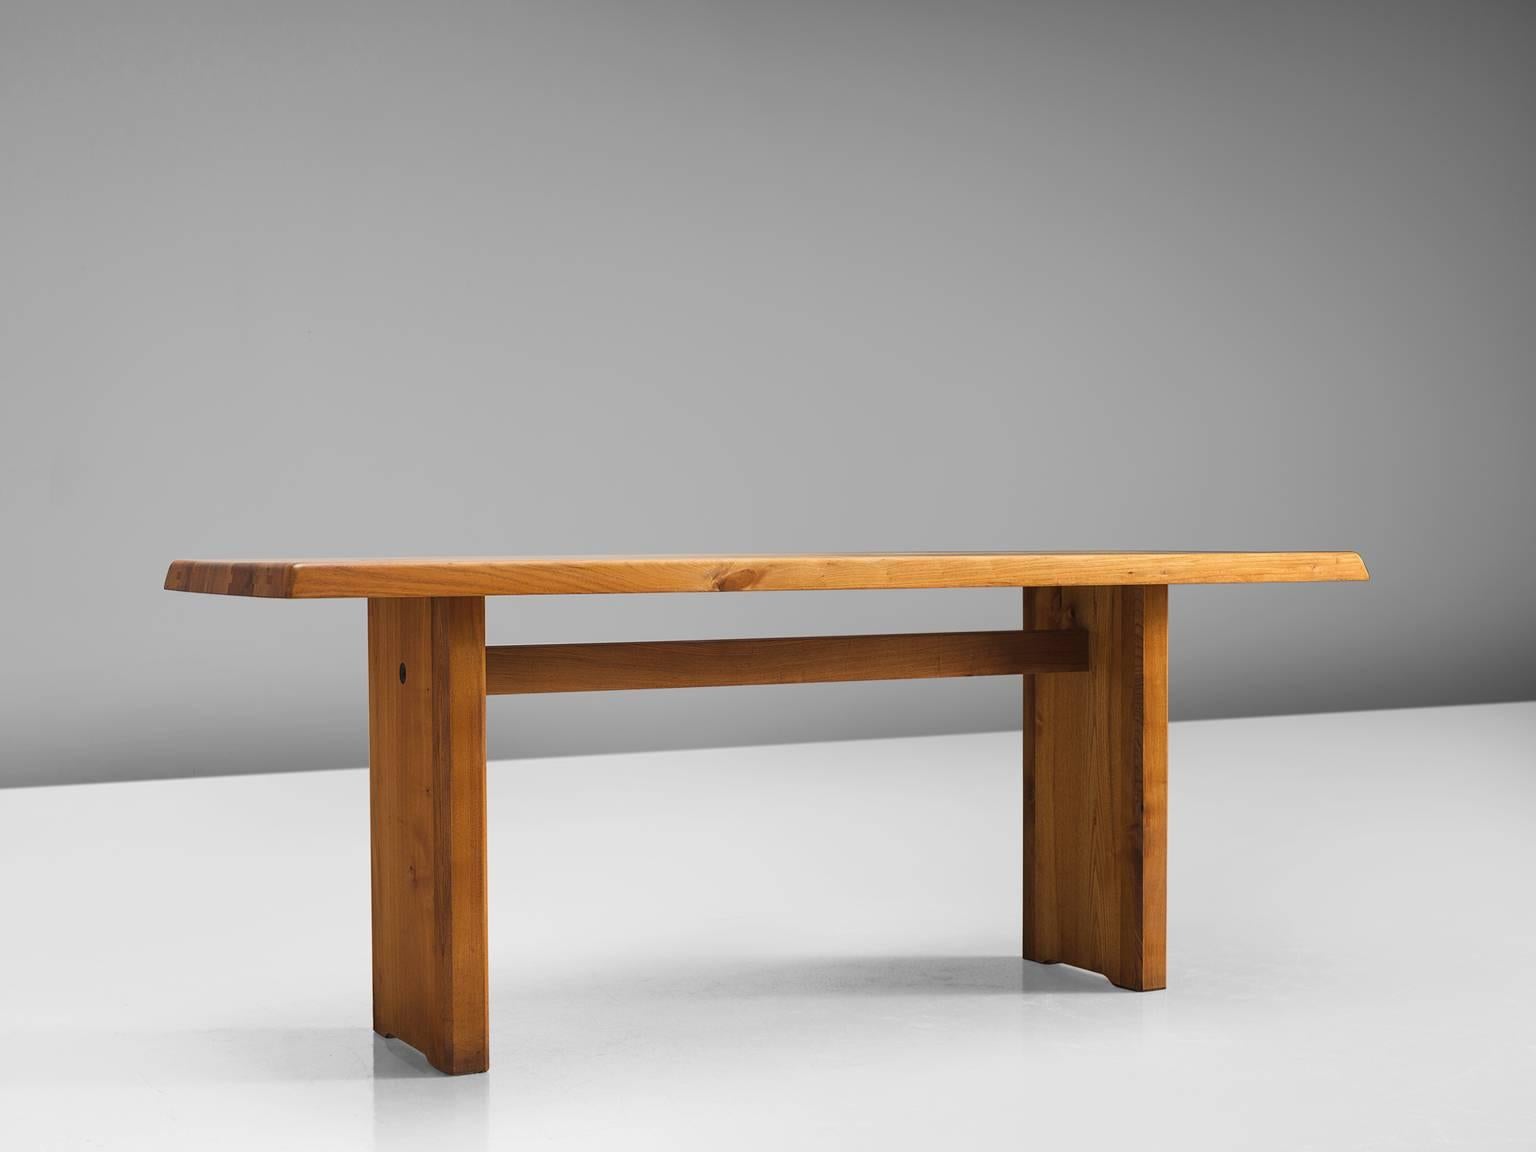 Pierre Chapo, dining table model T14C elmwood, France, 1960s. 

This dining table is designed by the French designer Pierre Chapo. The rectangular tabletop with sloping edges, rests on a two-legged base. Strong an simplified design which clearly